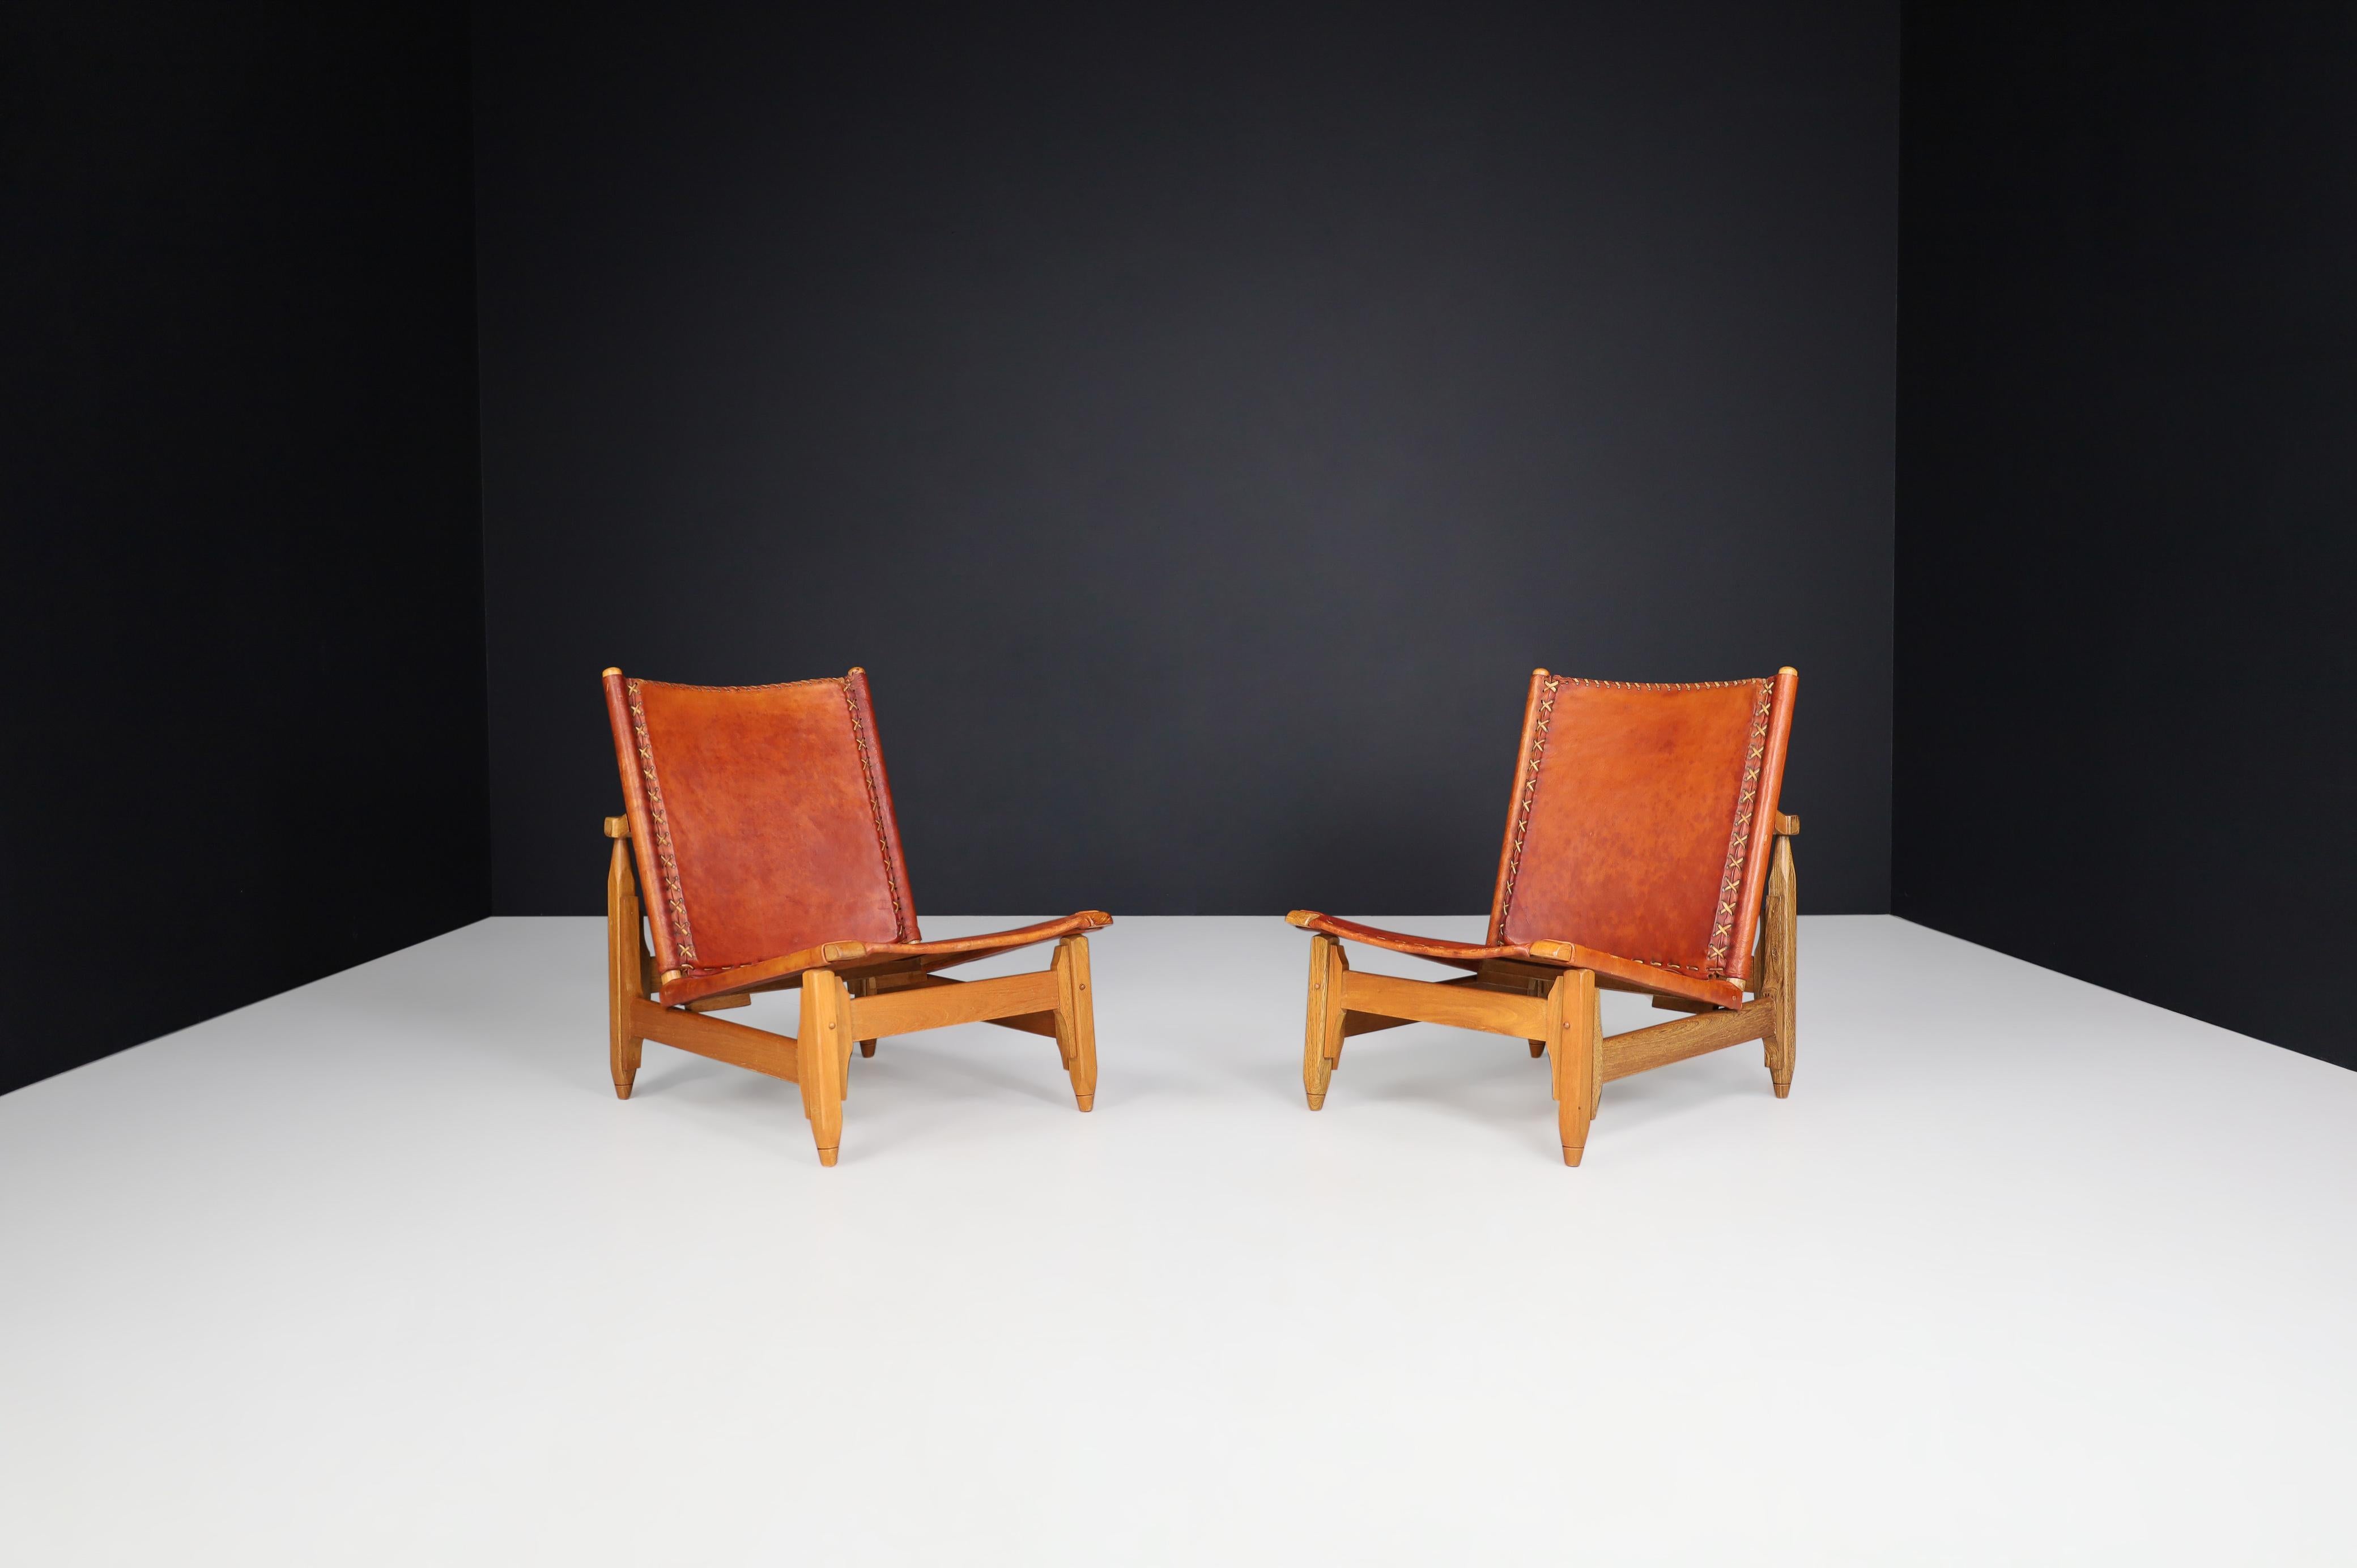 Arte Sano Biermann Cia Inc. Cognac leather hunting chairs, Colombia 1960s

Outstanding pair of two rare hunting lodge chairs designed by Biermann Werner for Arte Sano. These chairs are made of hand-tanned cognac-colored leather. The sturdy wood